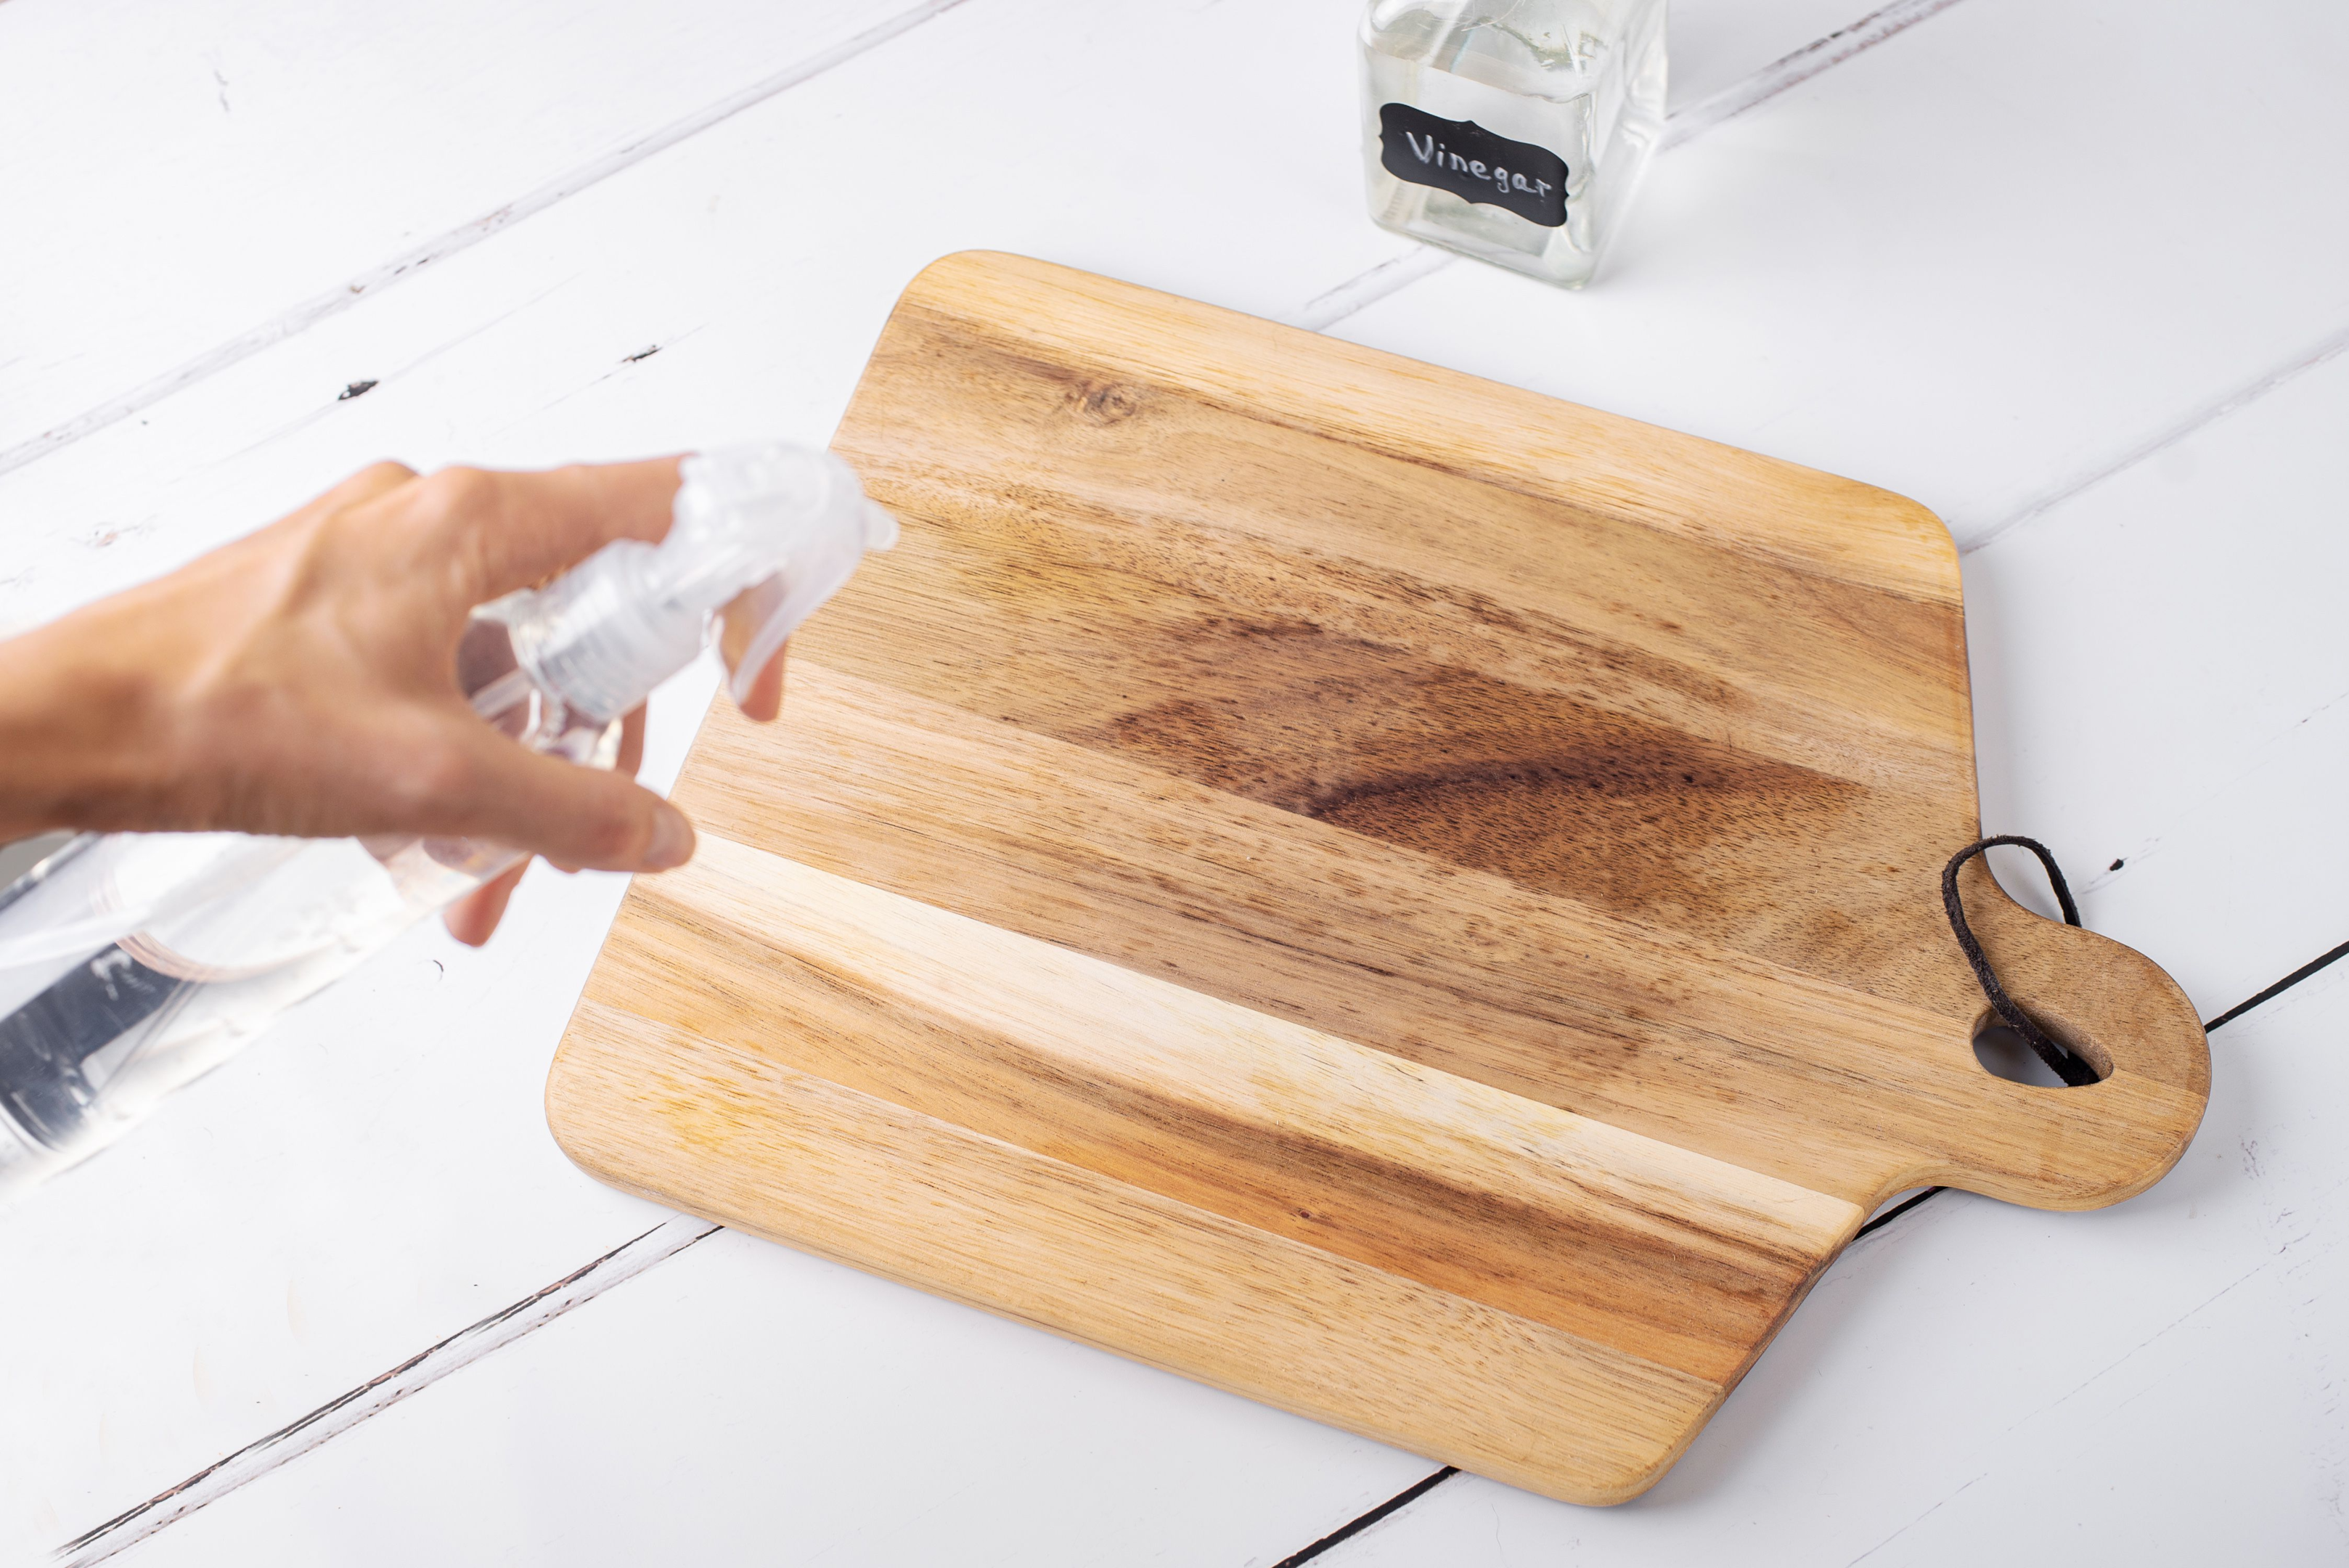 Removing the odor of your wood chopping boards